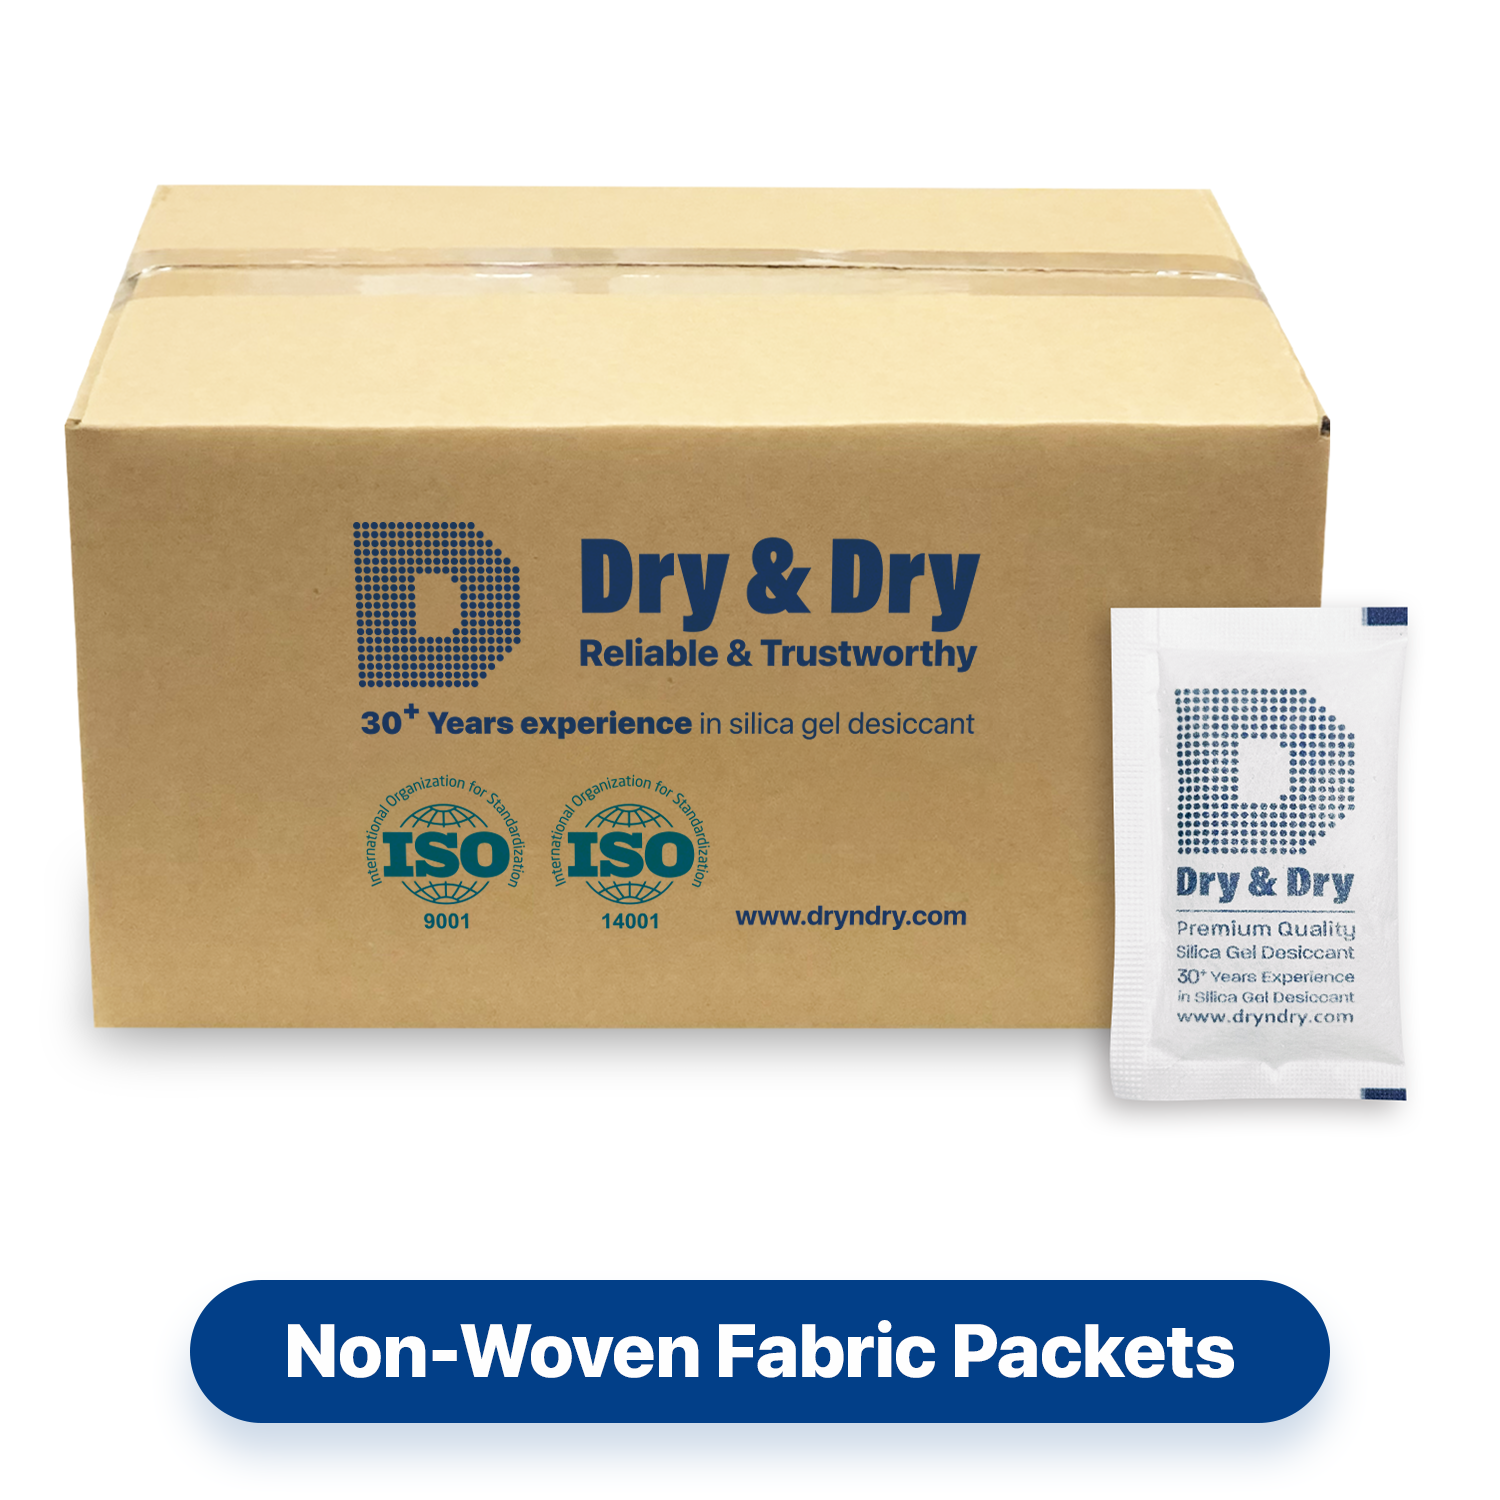 10 Gram [1700 Packets] "Dry & Dry" Premium Silica Gel Desiccant Packets - Rechargeable Non-Woven Fabric (Cloth)